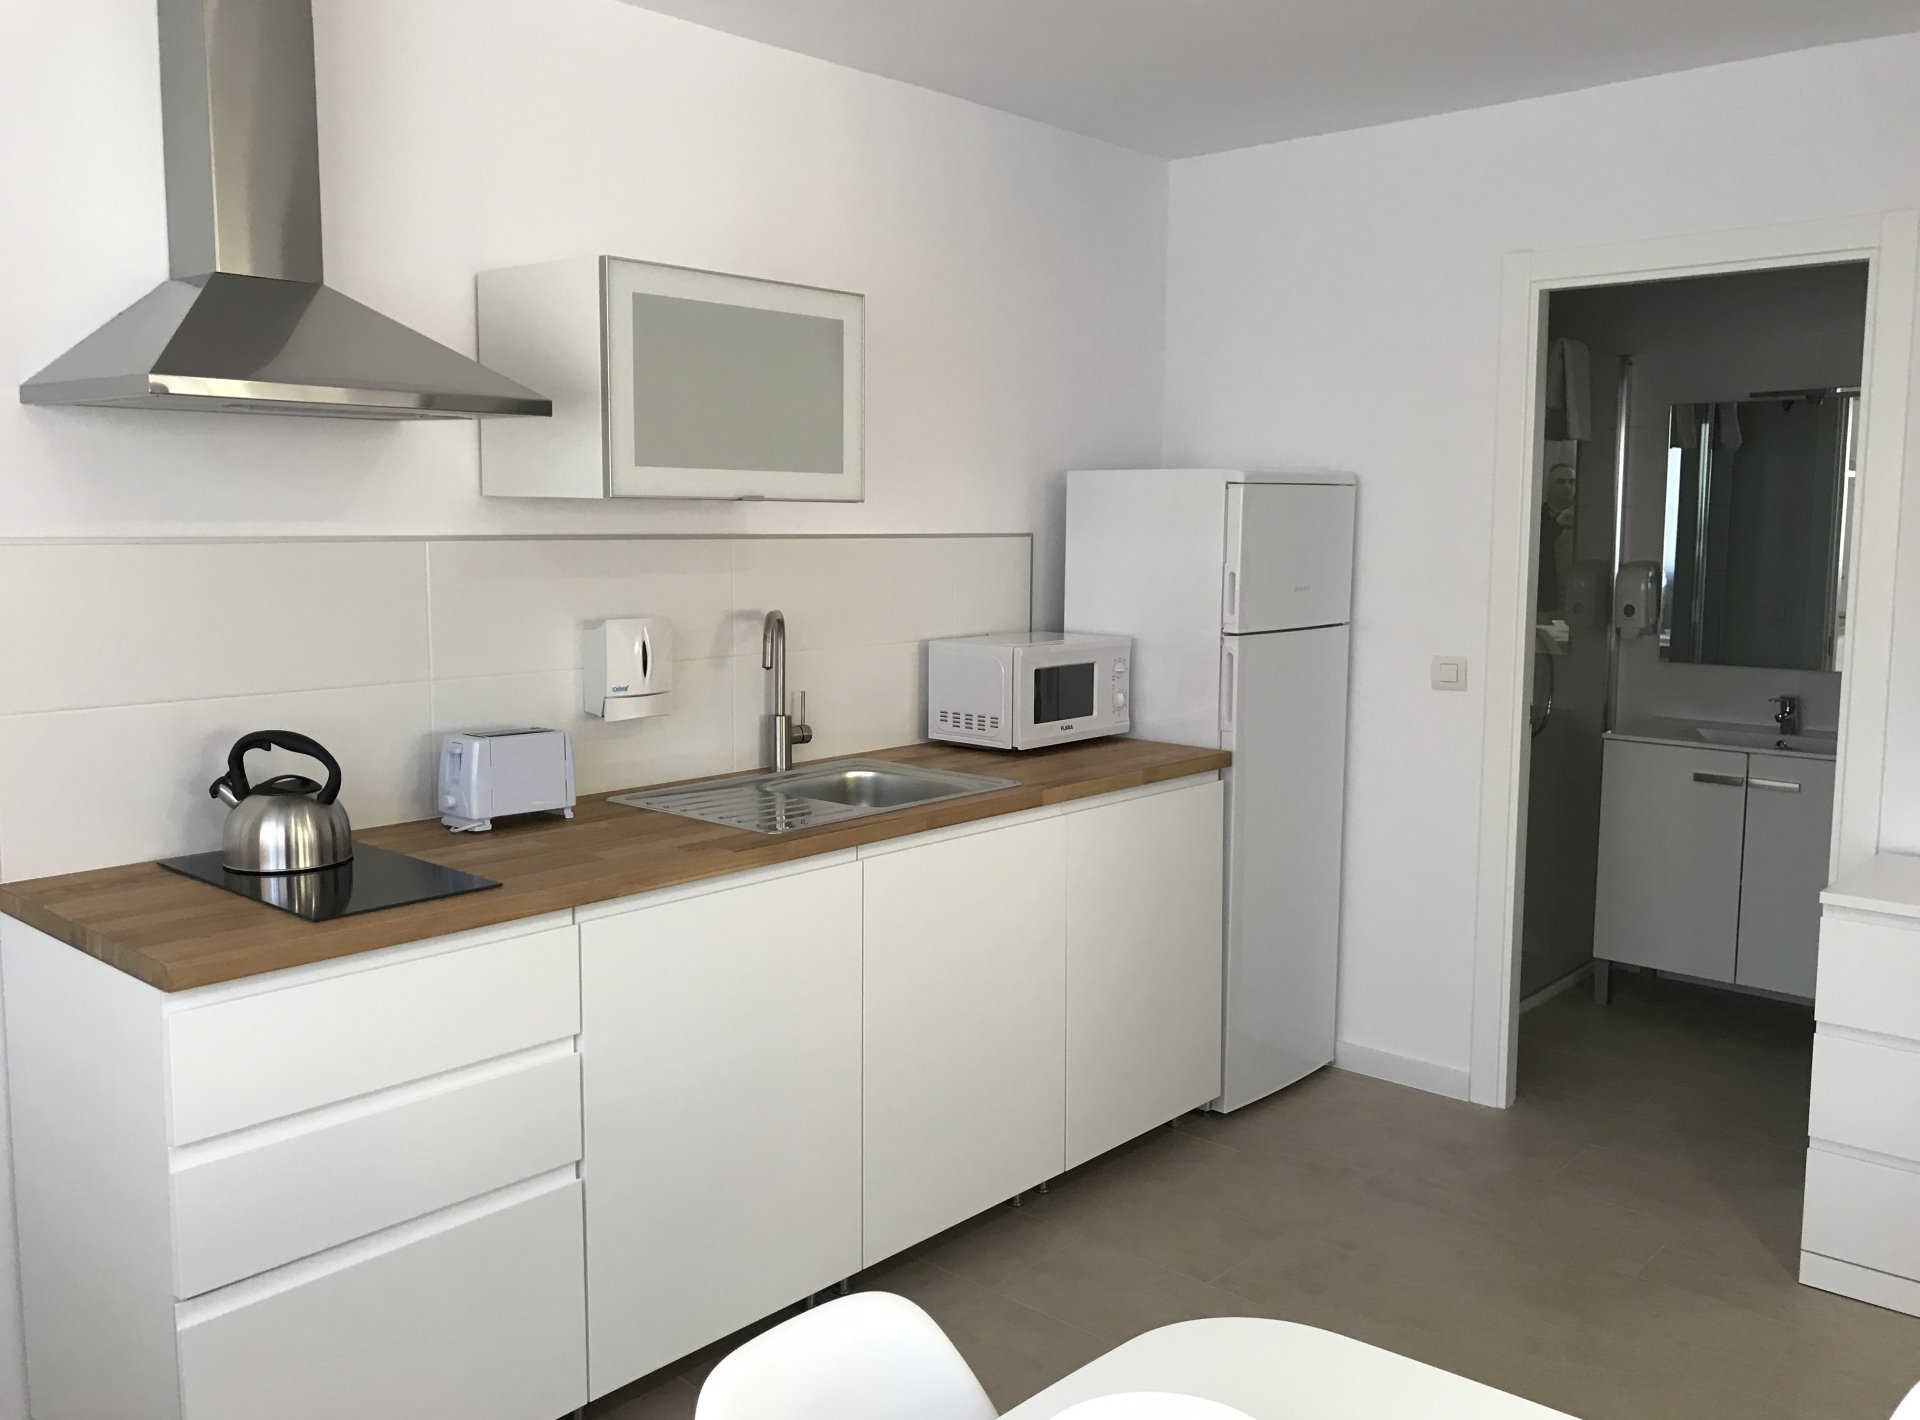 REIG 6. 1 Bedroom Apartment up to 4 people. Valencia